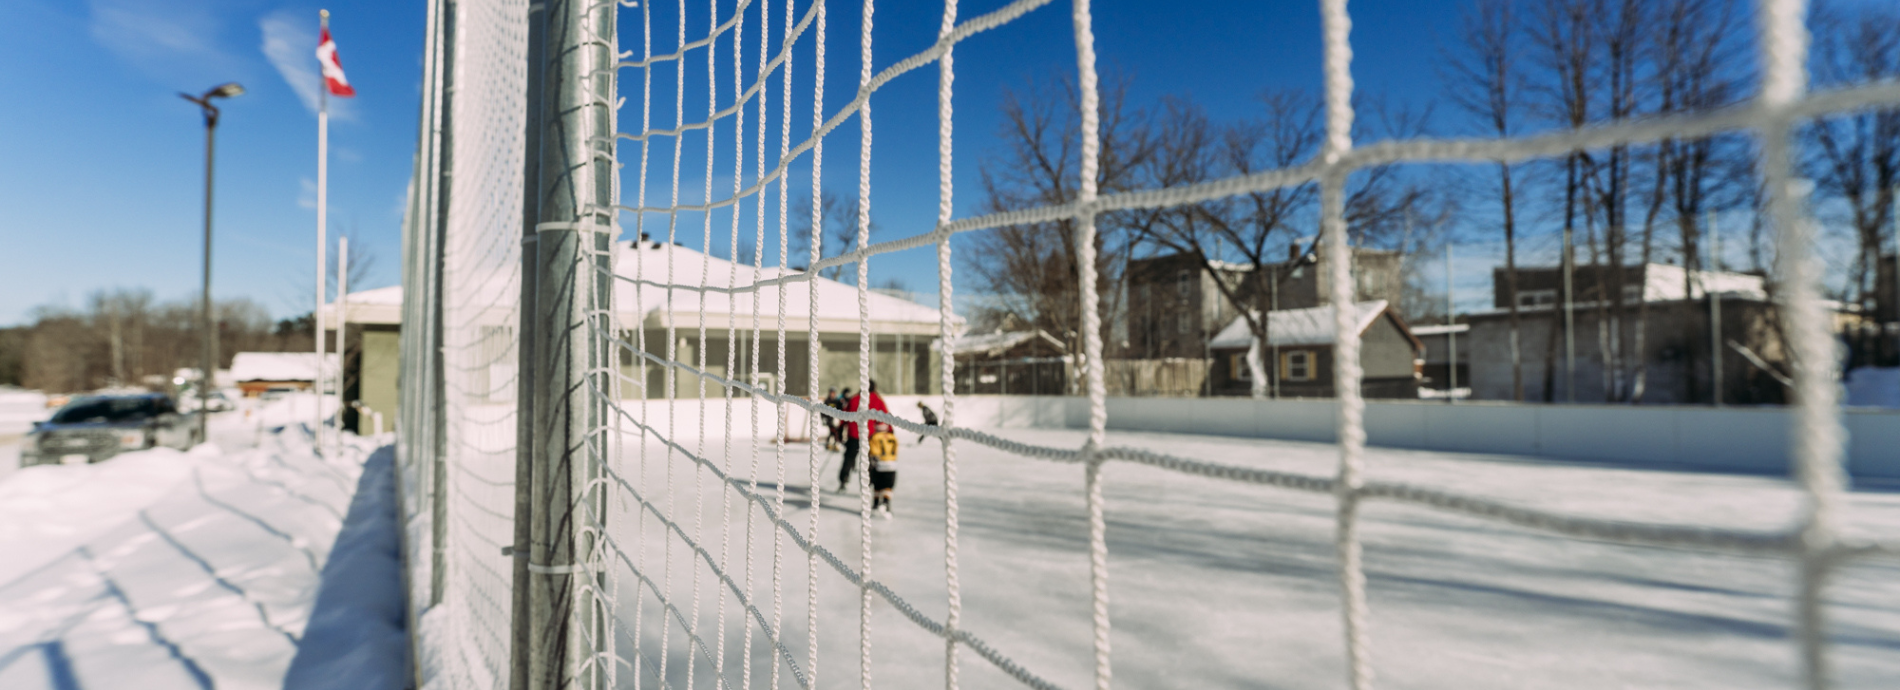 netting at the Washago outdoor ice rink